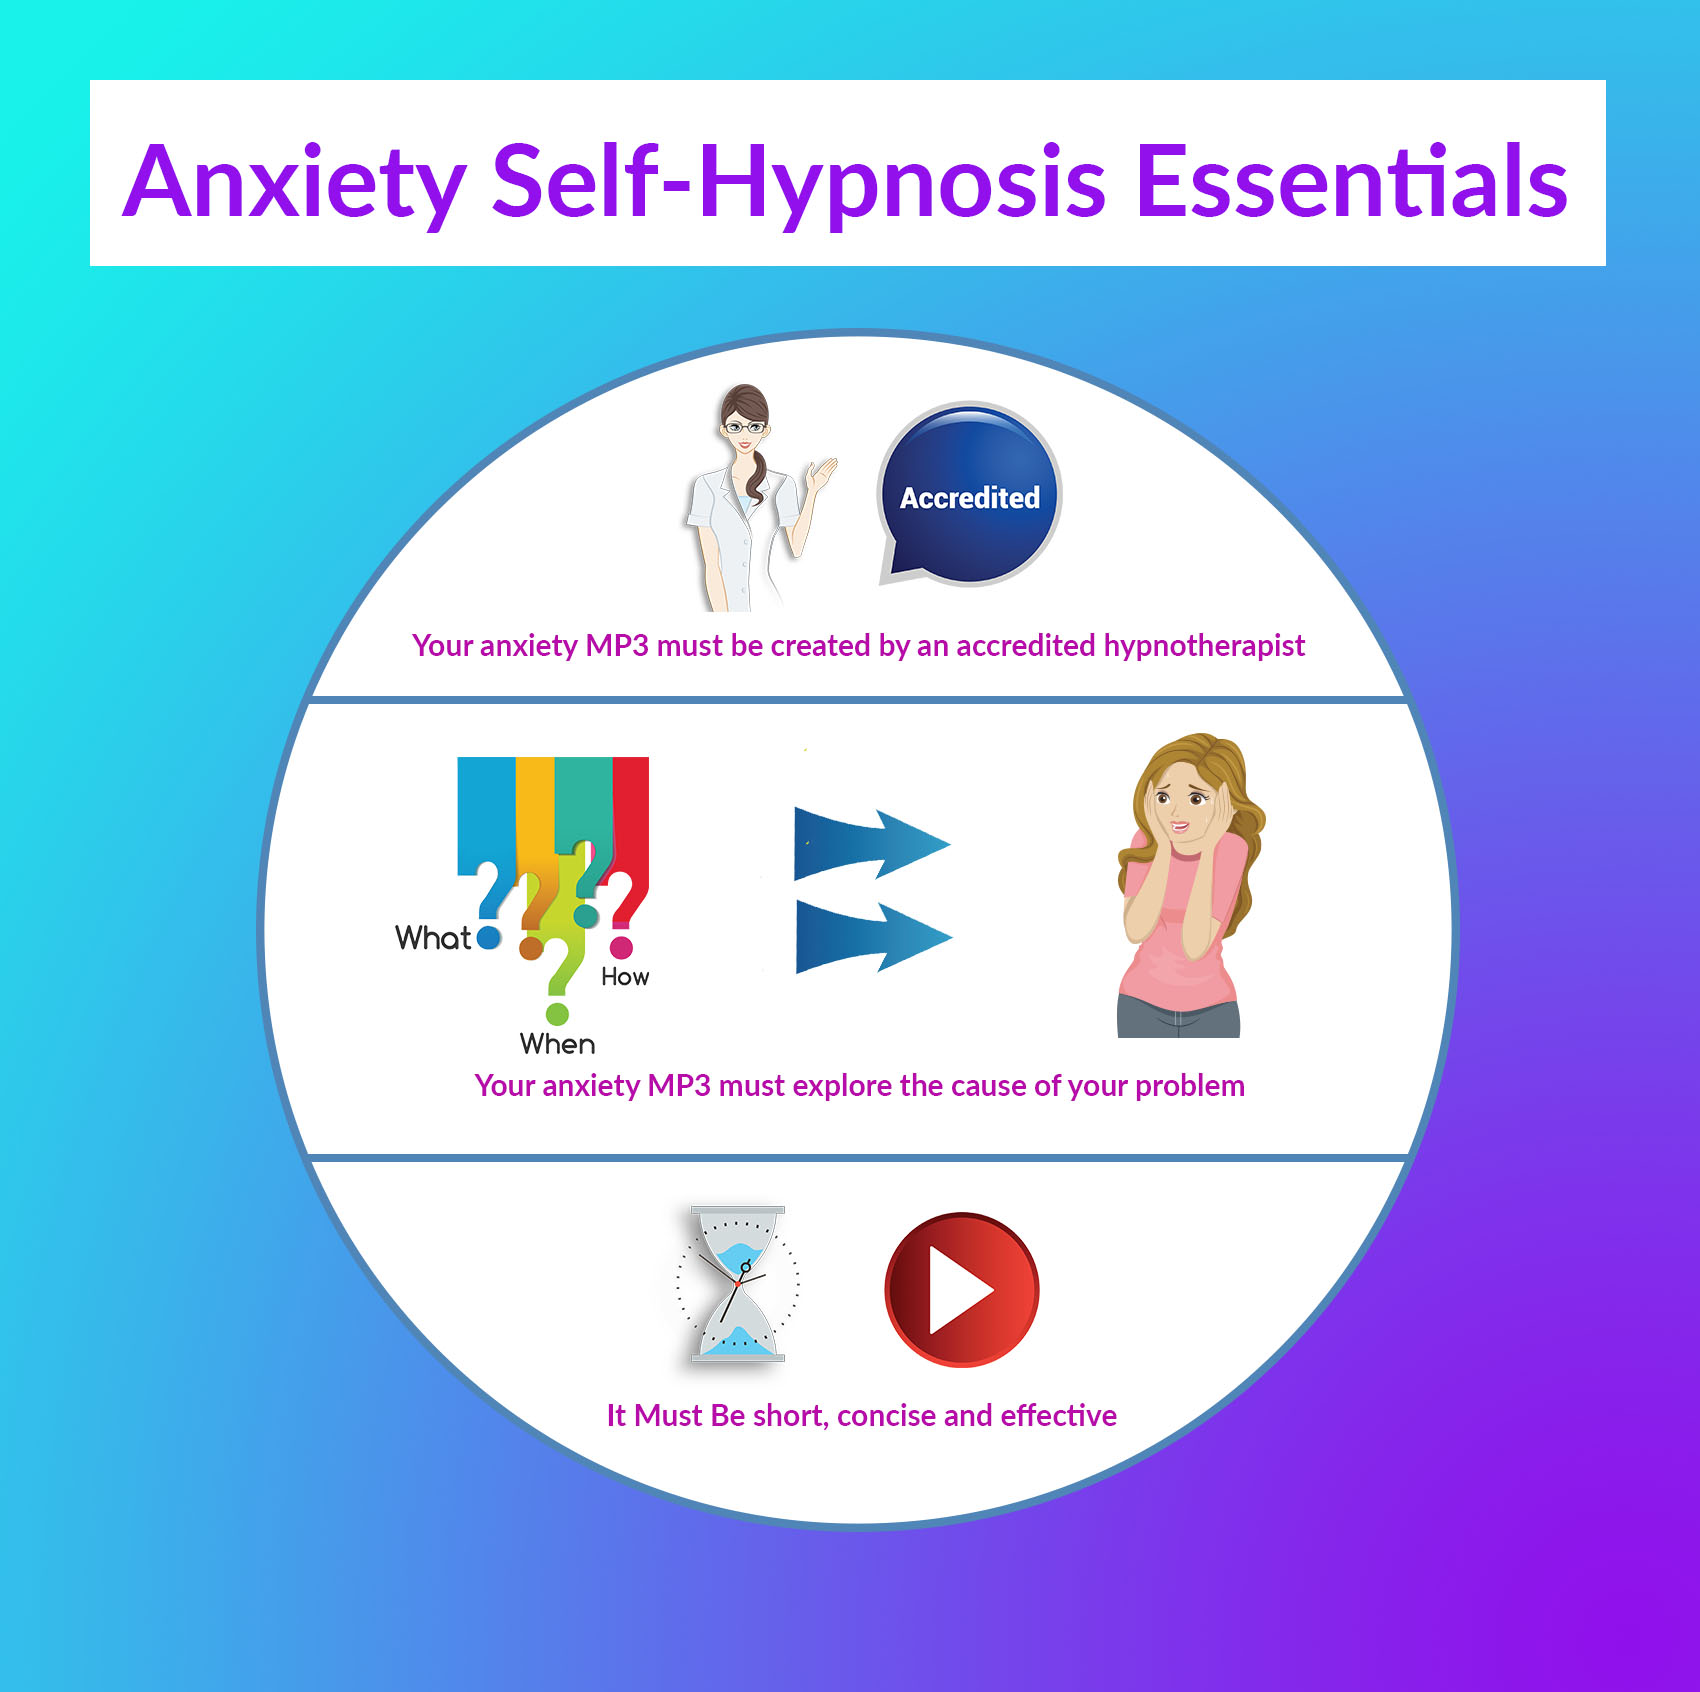 Essentials of self-hypnosis recordings for anxiety